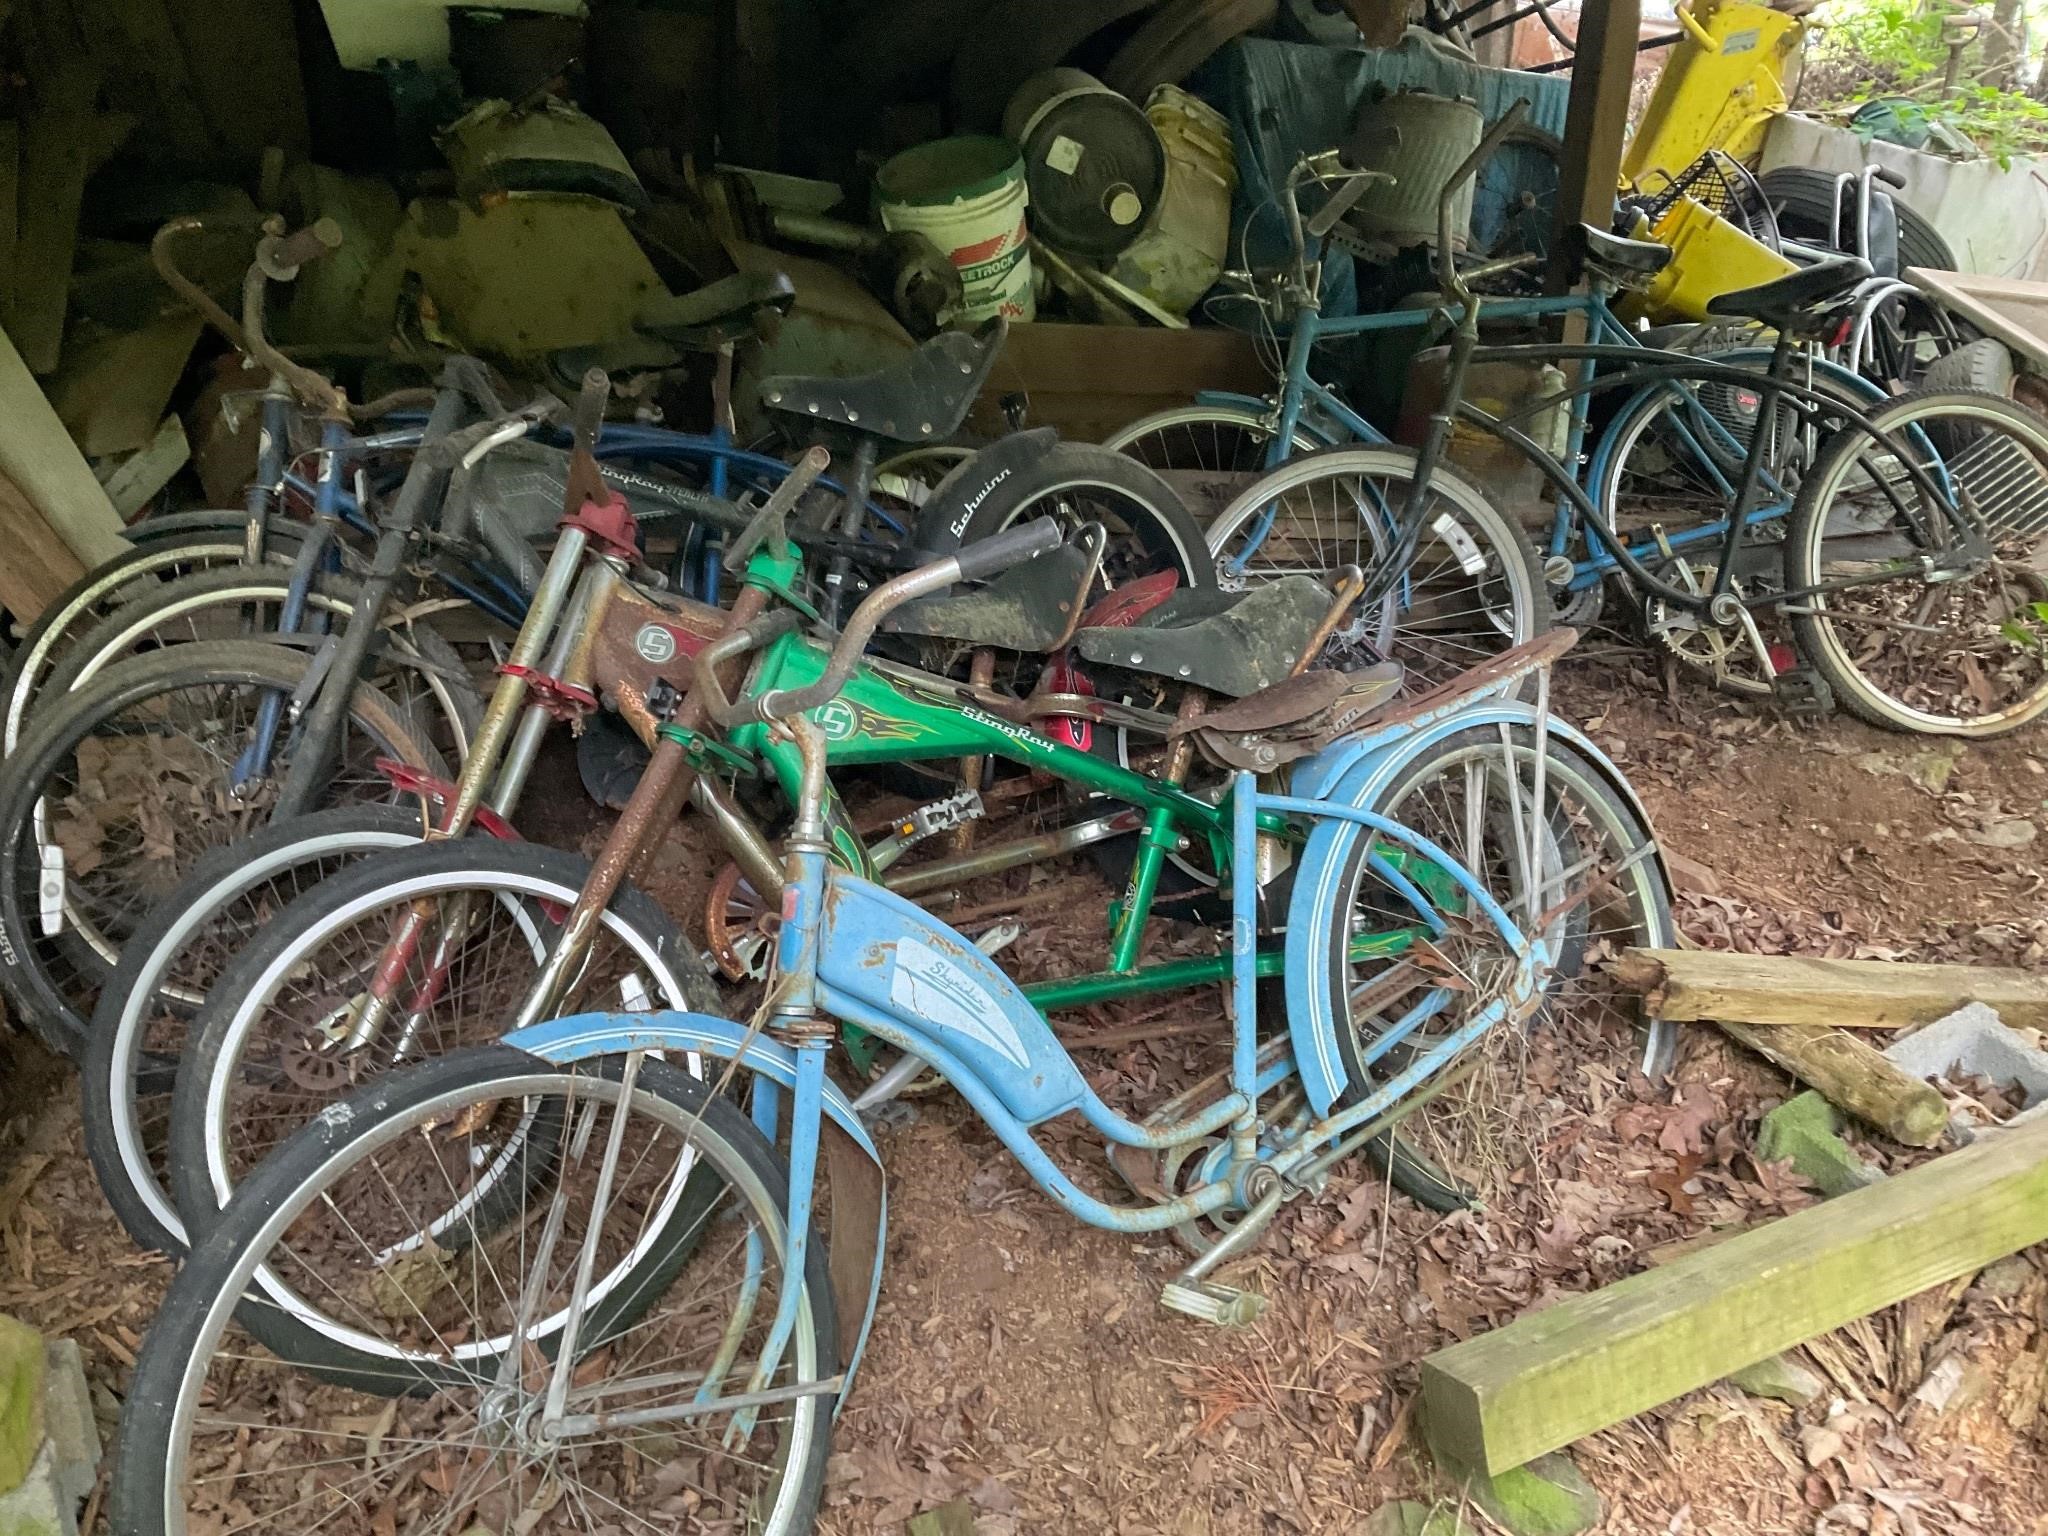 14 bicycles